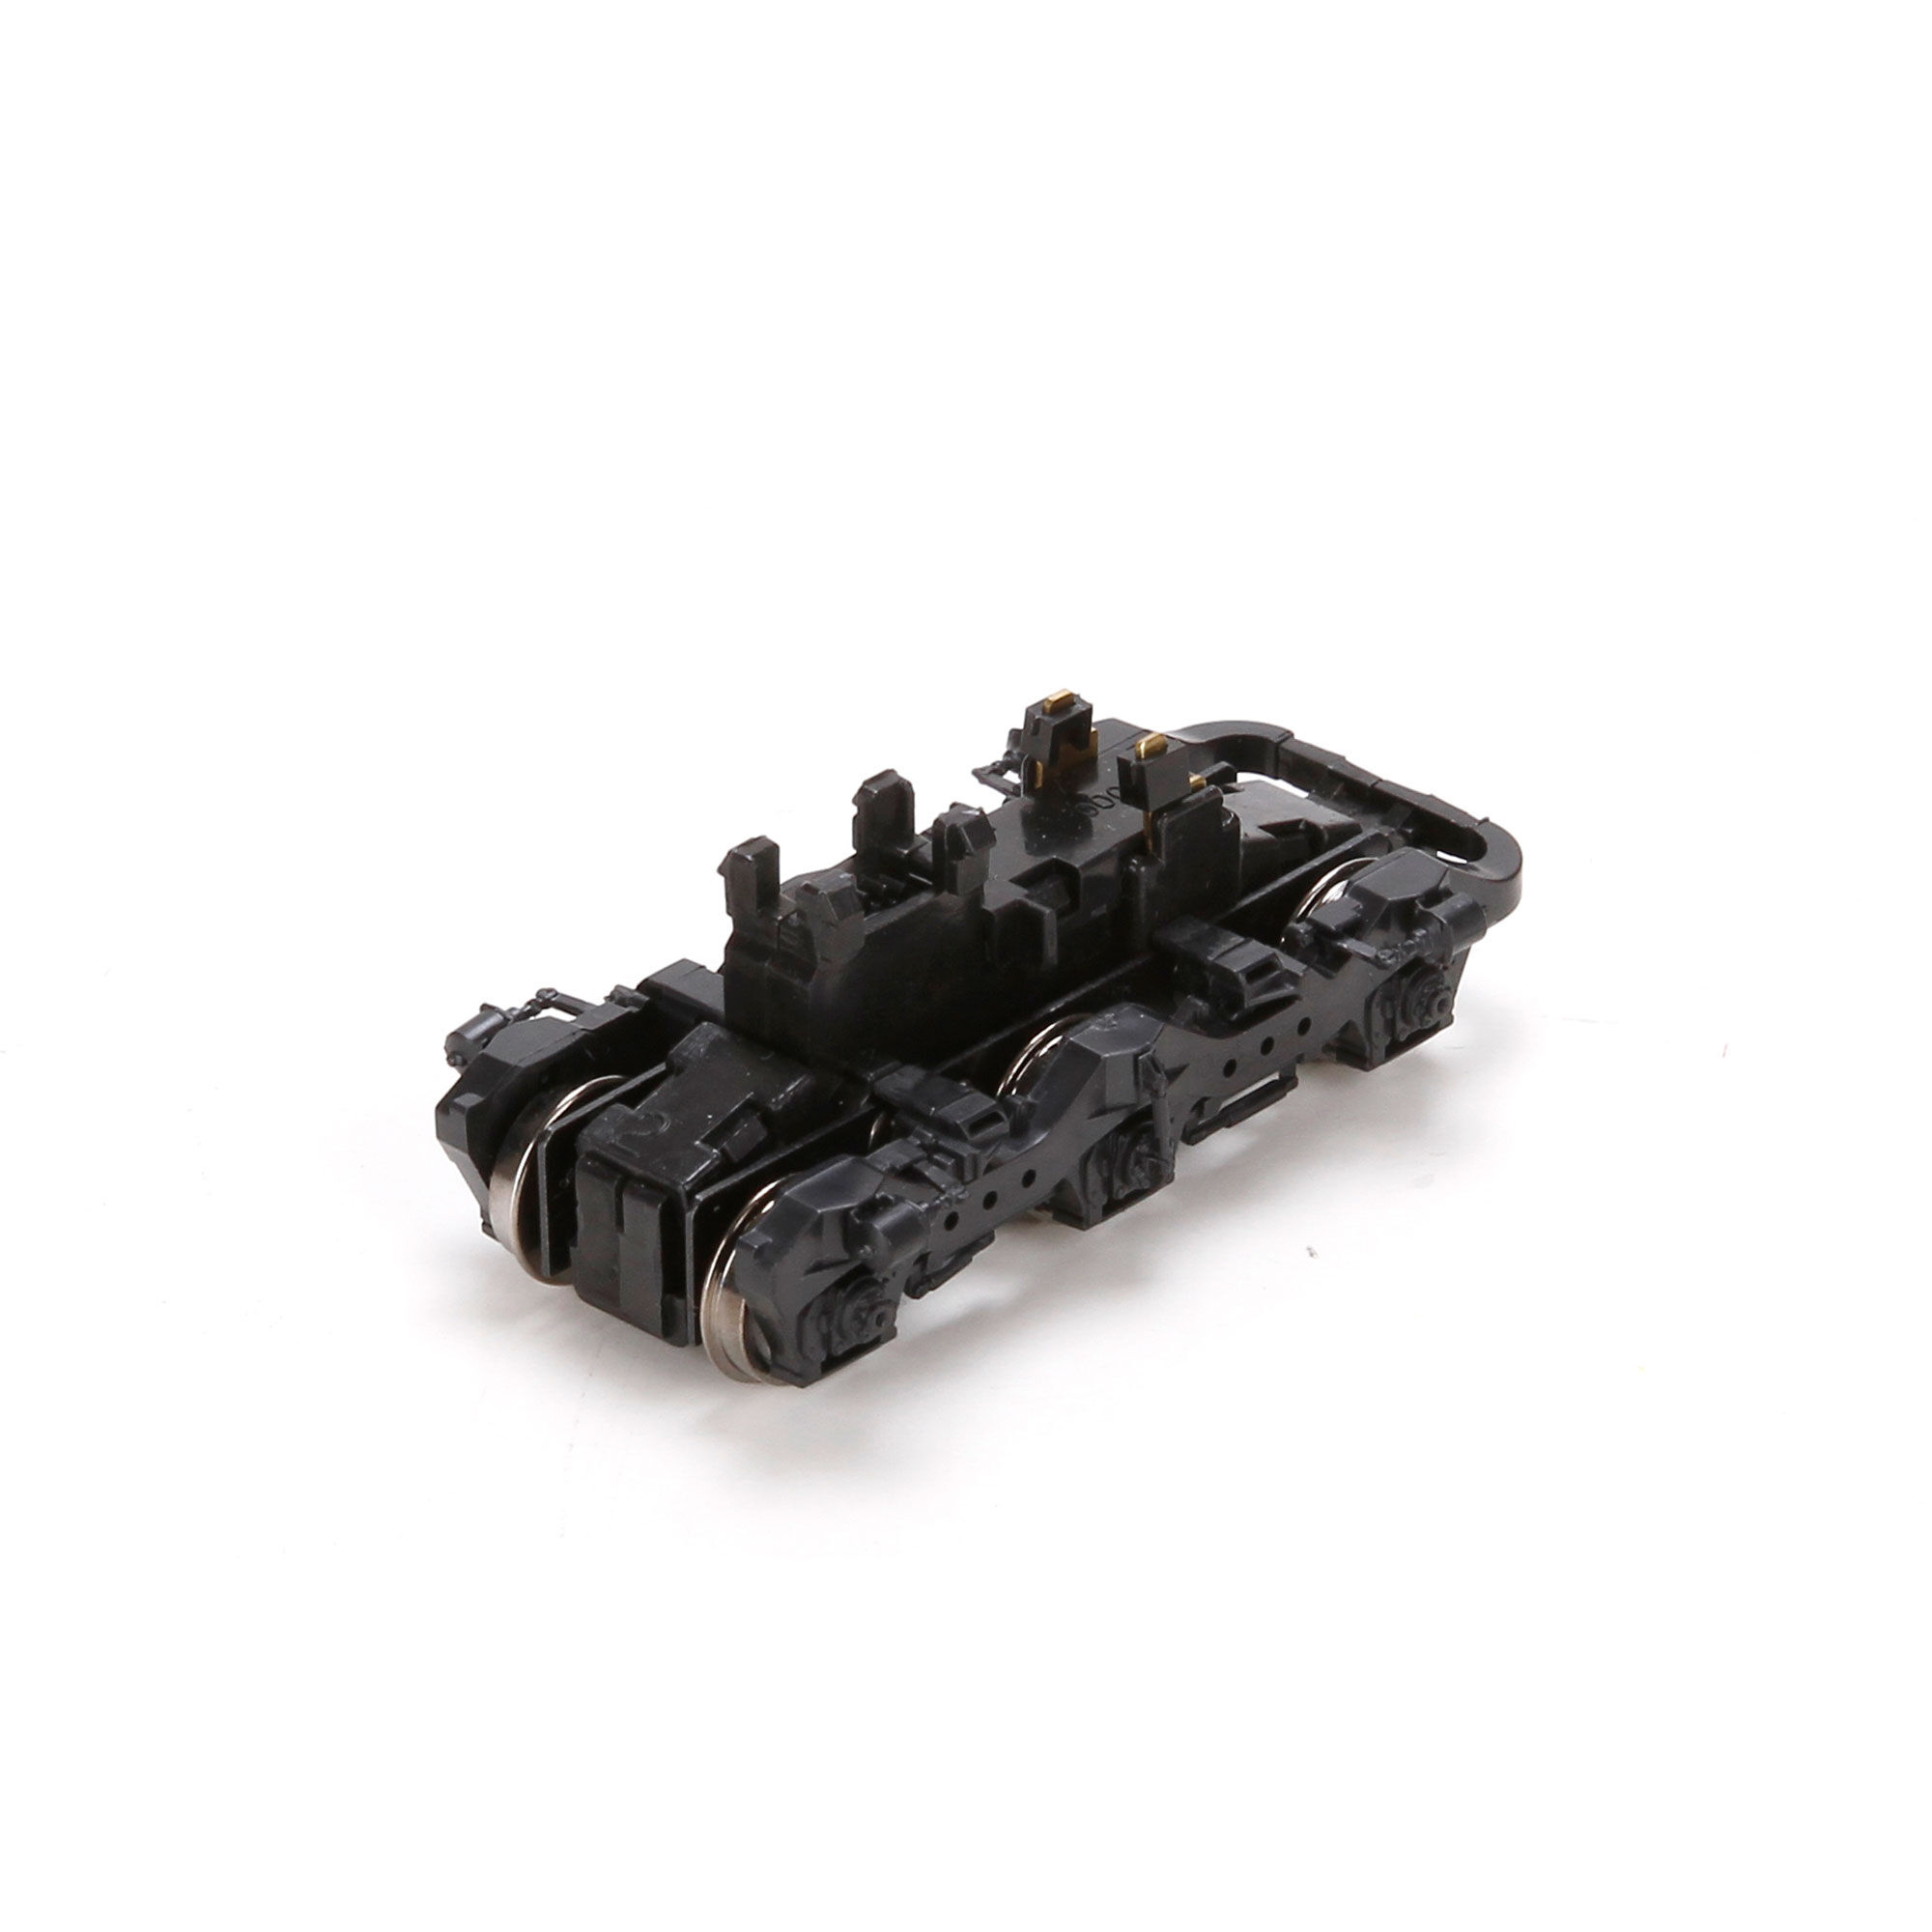 Athearn HO Truck 4-wheel Passenger/black Ath90410 for sale online 